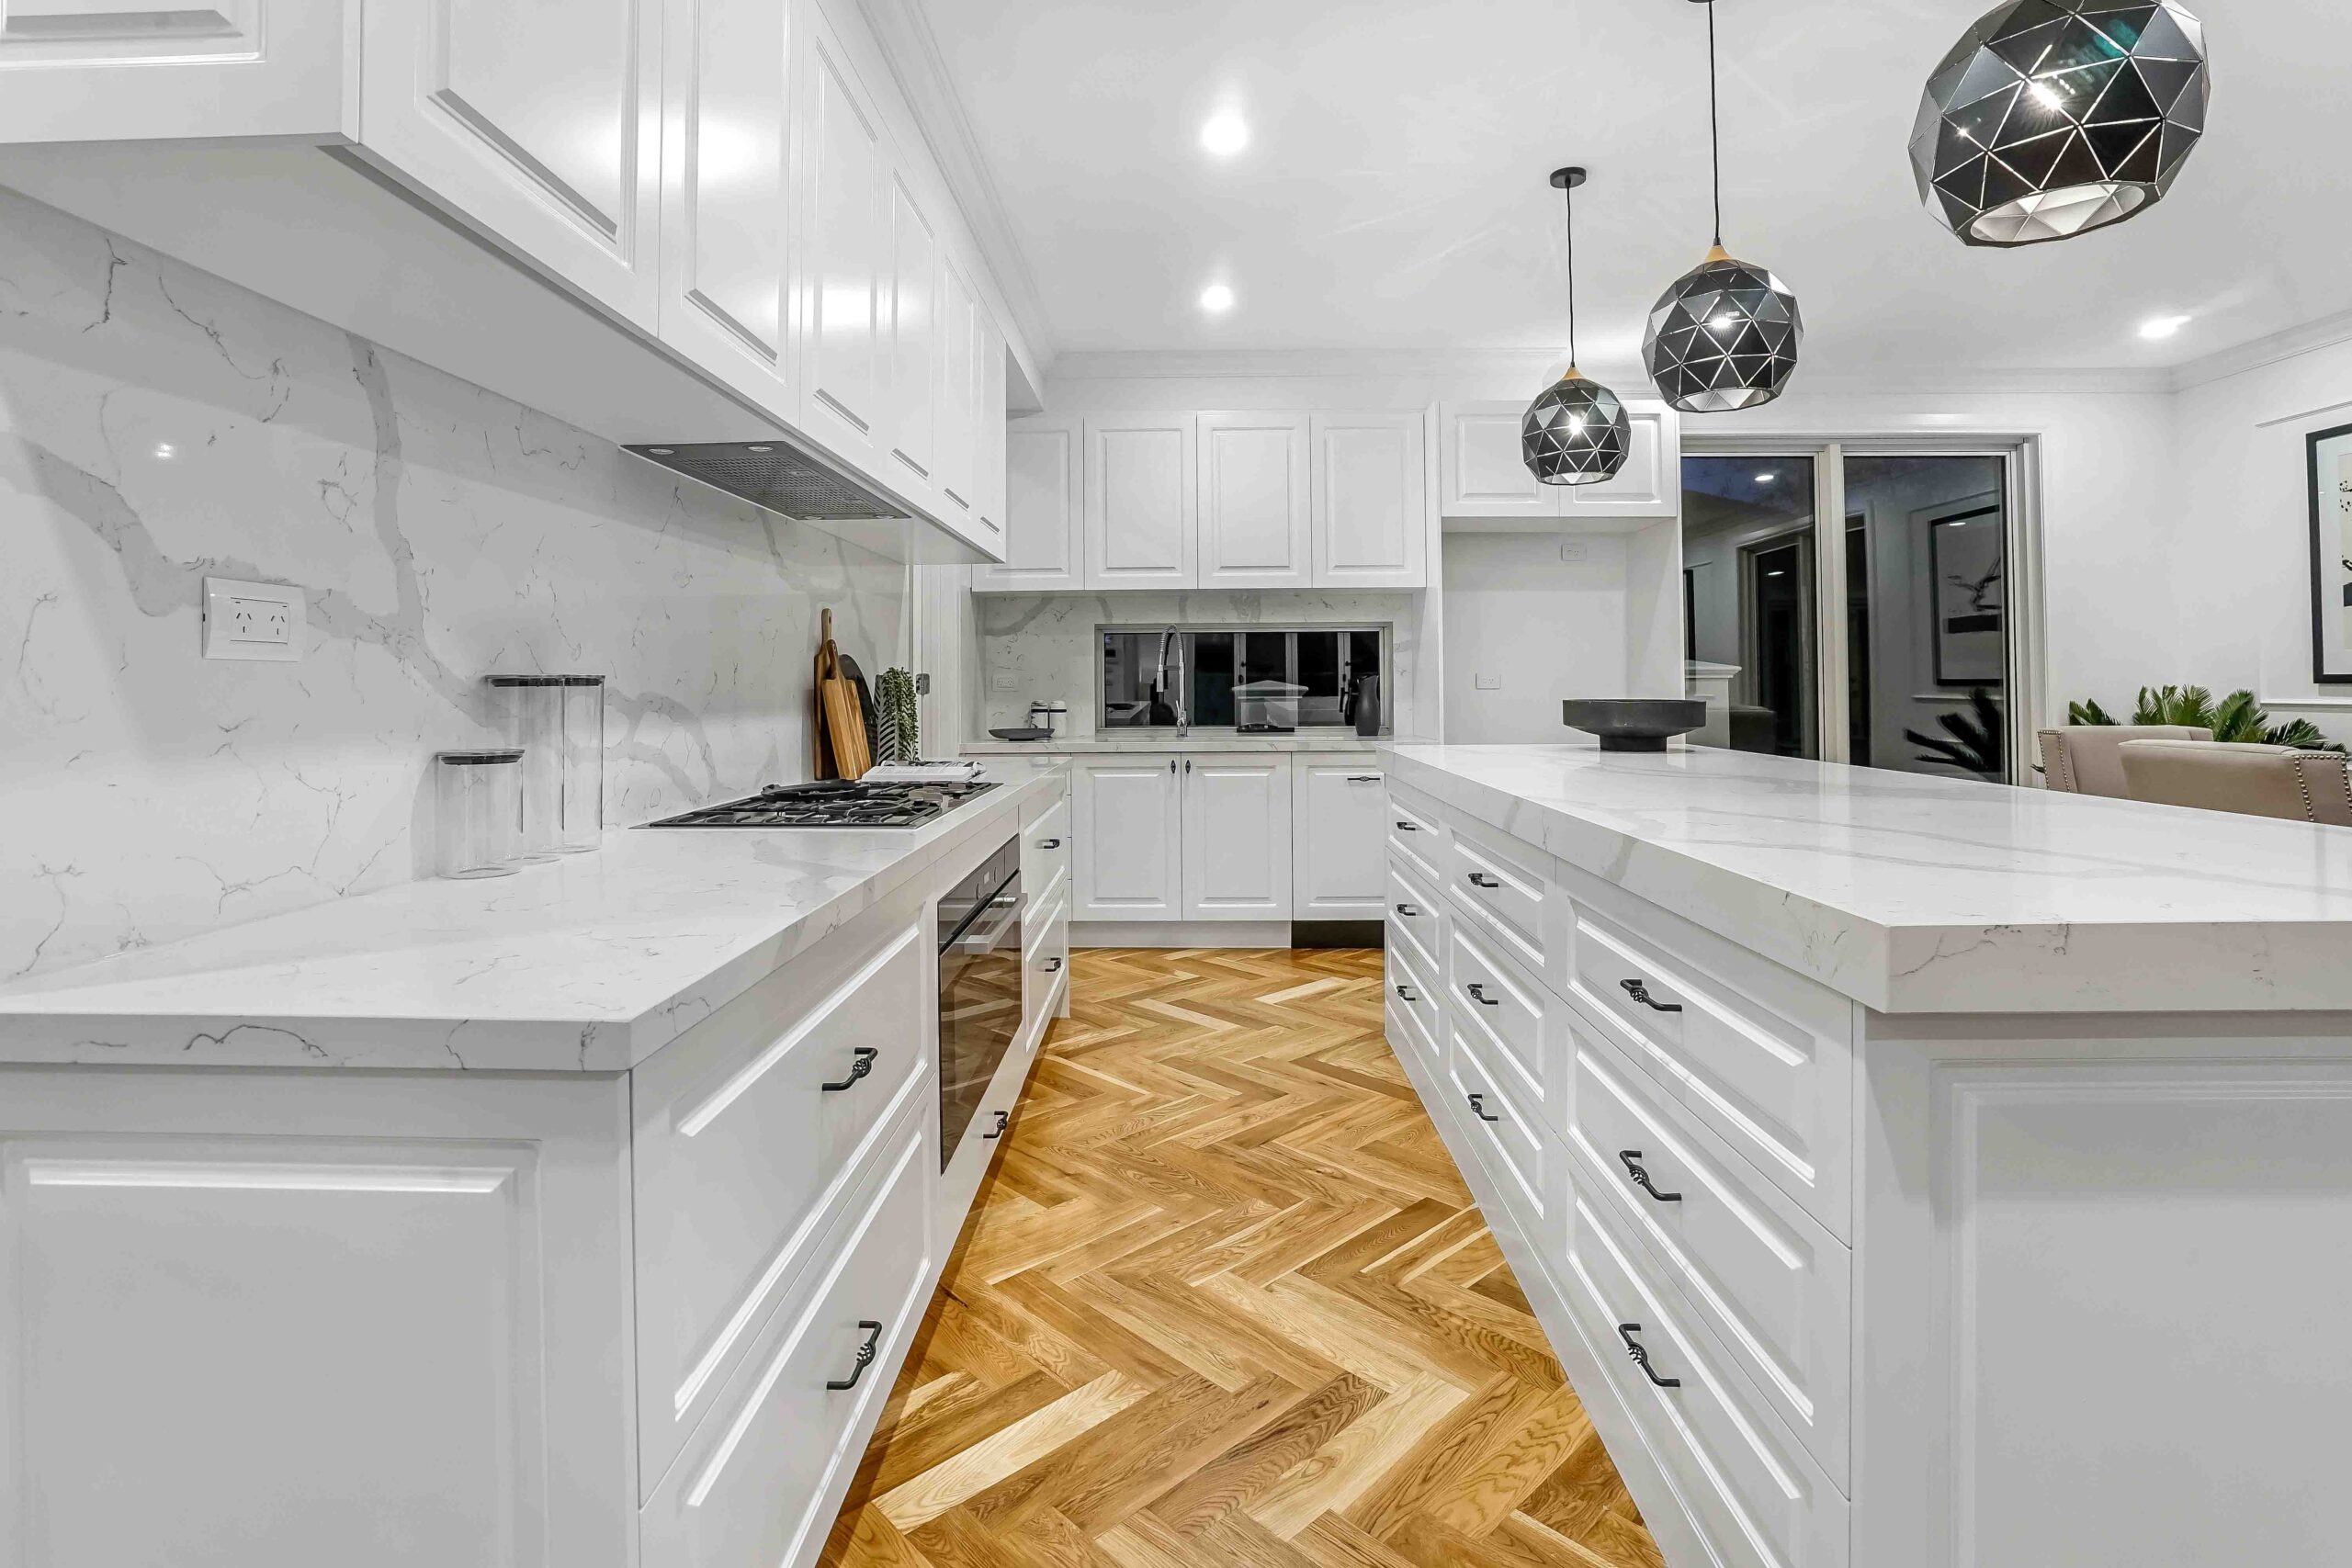 Experiment with pattern play and different types of flooring with this kitchen floor idea. Pictured: A patterned hardwood floor in a kitchen.